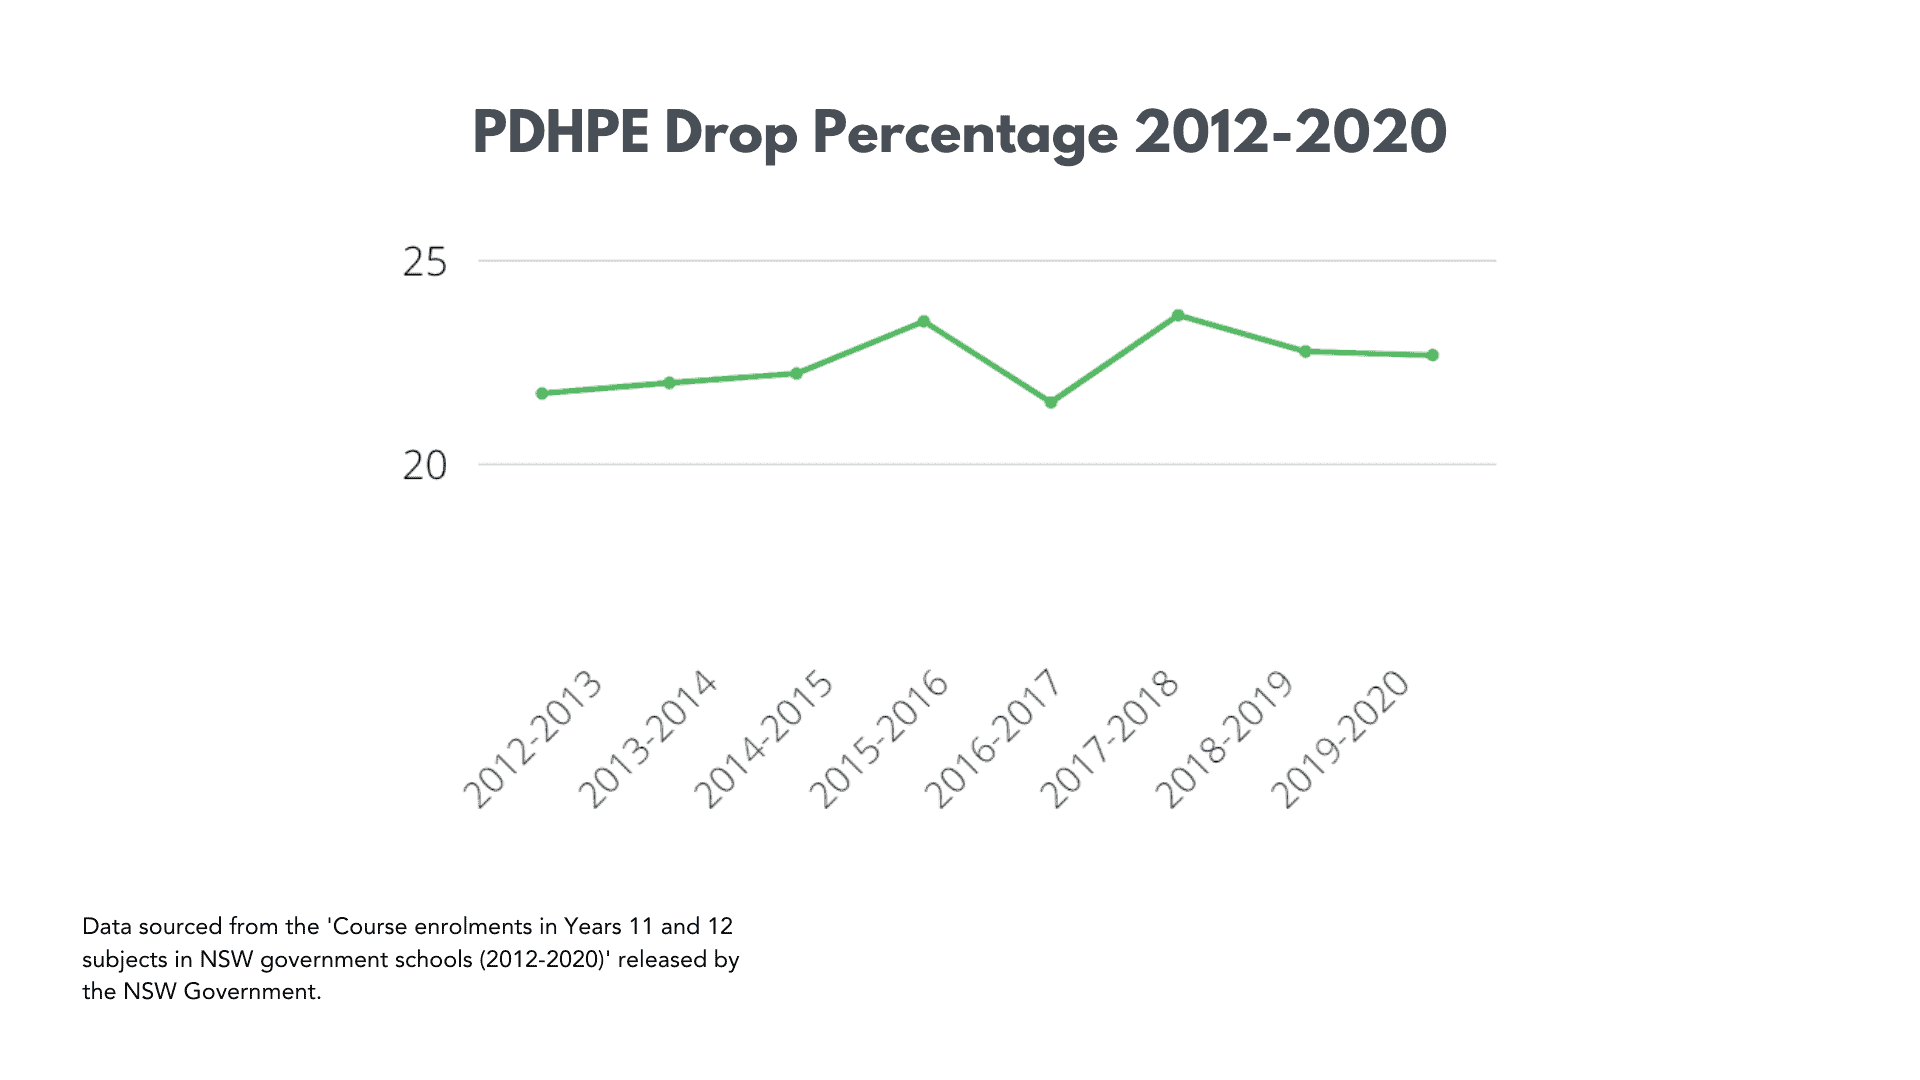 Historical Drop Percentage for PDHPE from 2012 to 2020